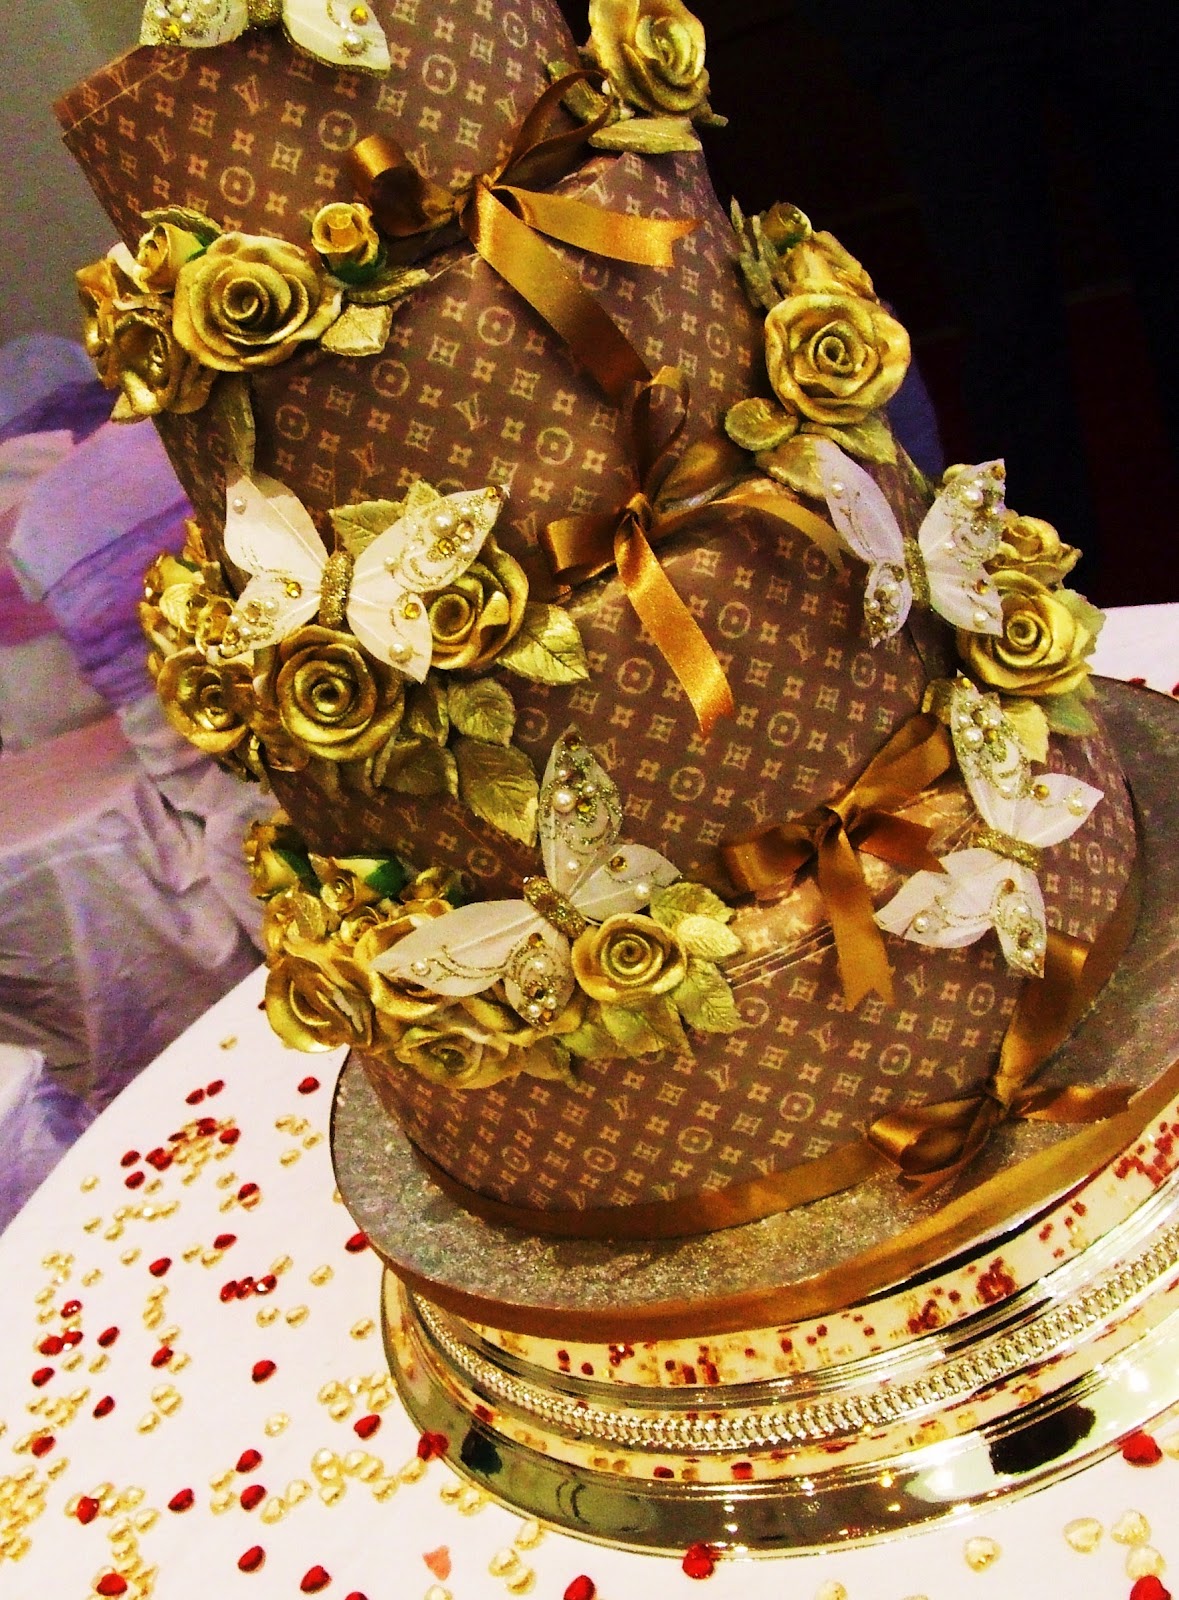 Iced Out Company Cakes!: Louis Vuitton Wedding Cake @ Iced Out